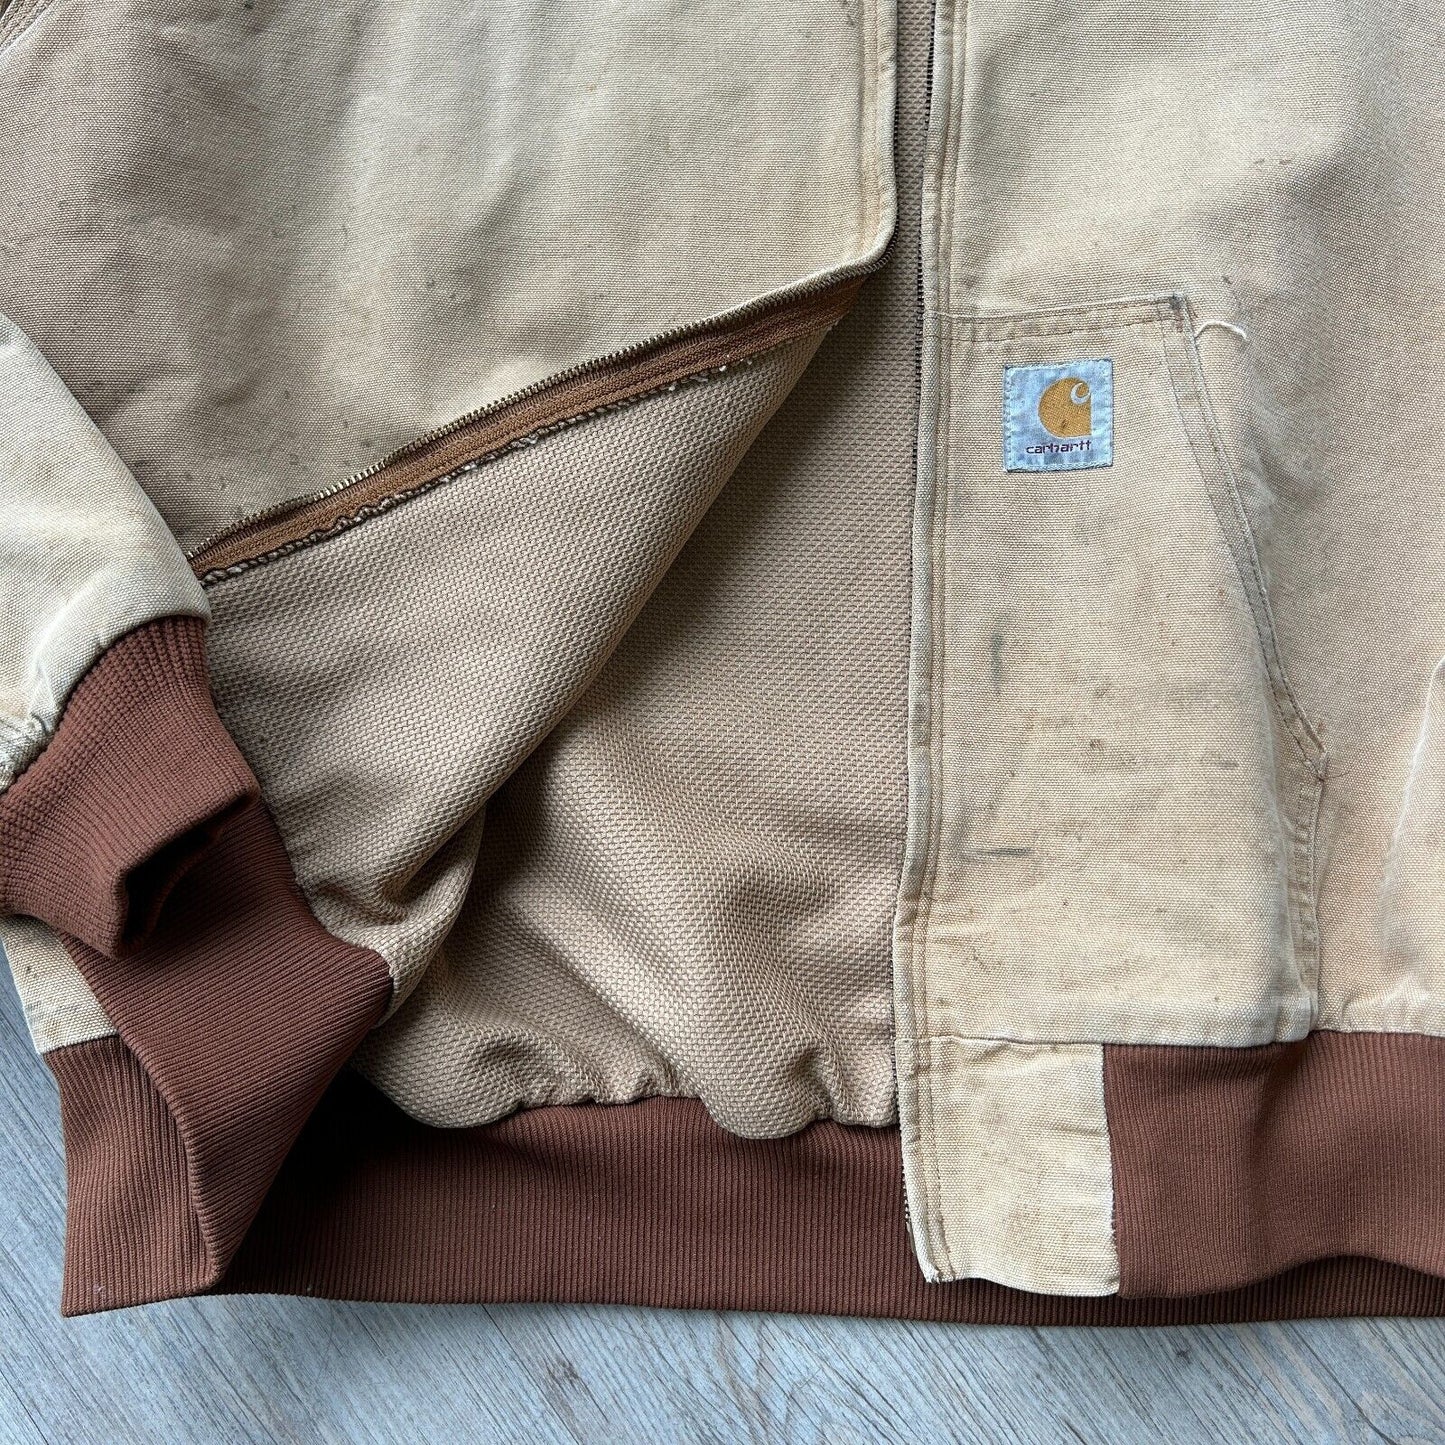 VINTAGE | CARHARTT Sun Faded Thermal Lined Hooded Workwear Jacket sz 4XL Adult